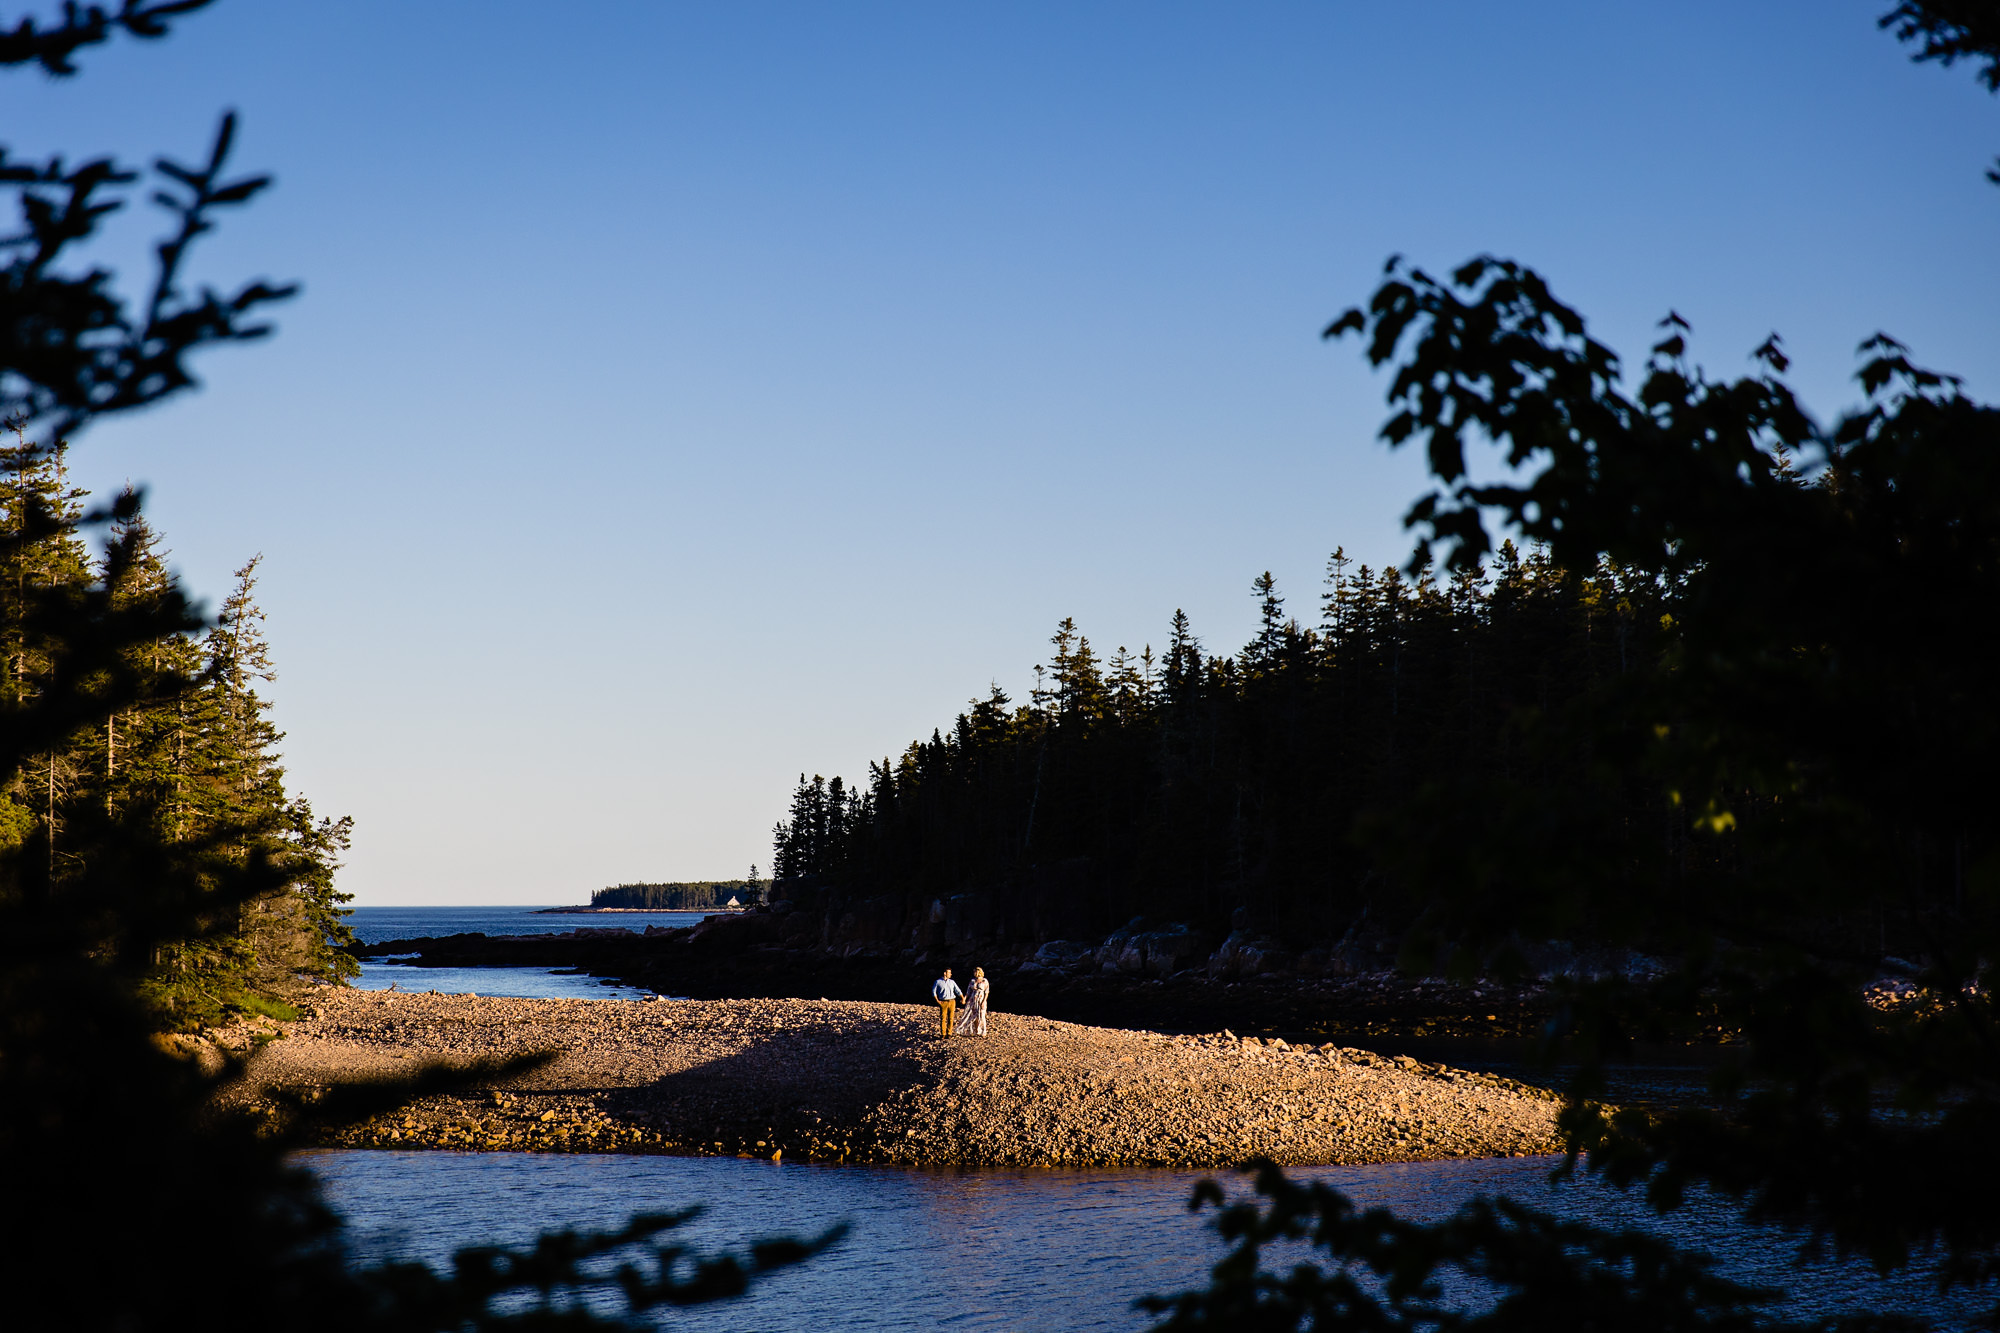 An engagement session taken at sunset in Acadia